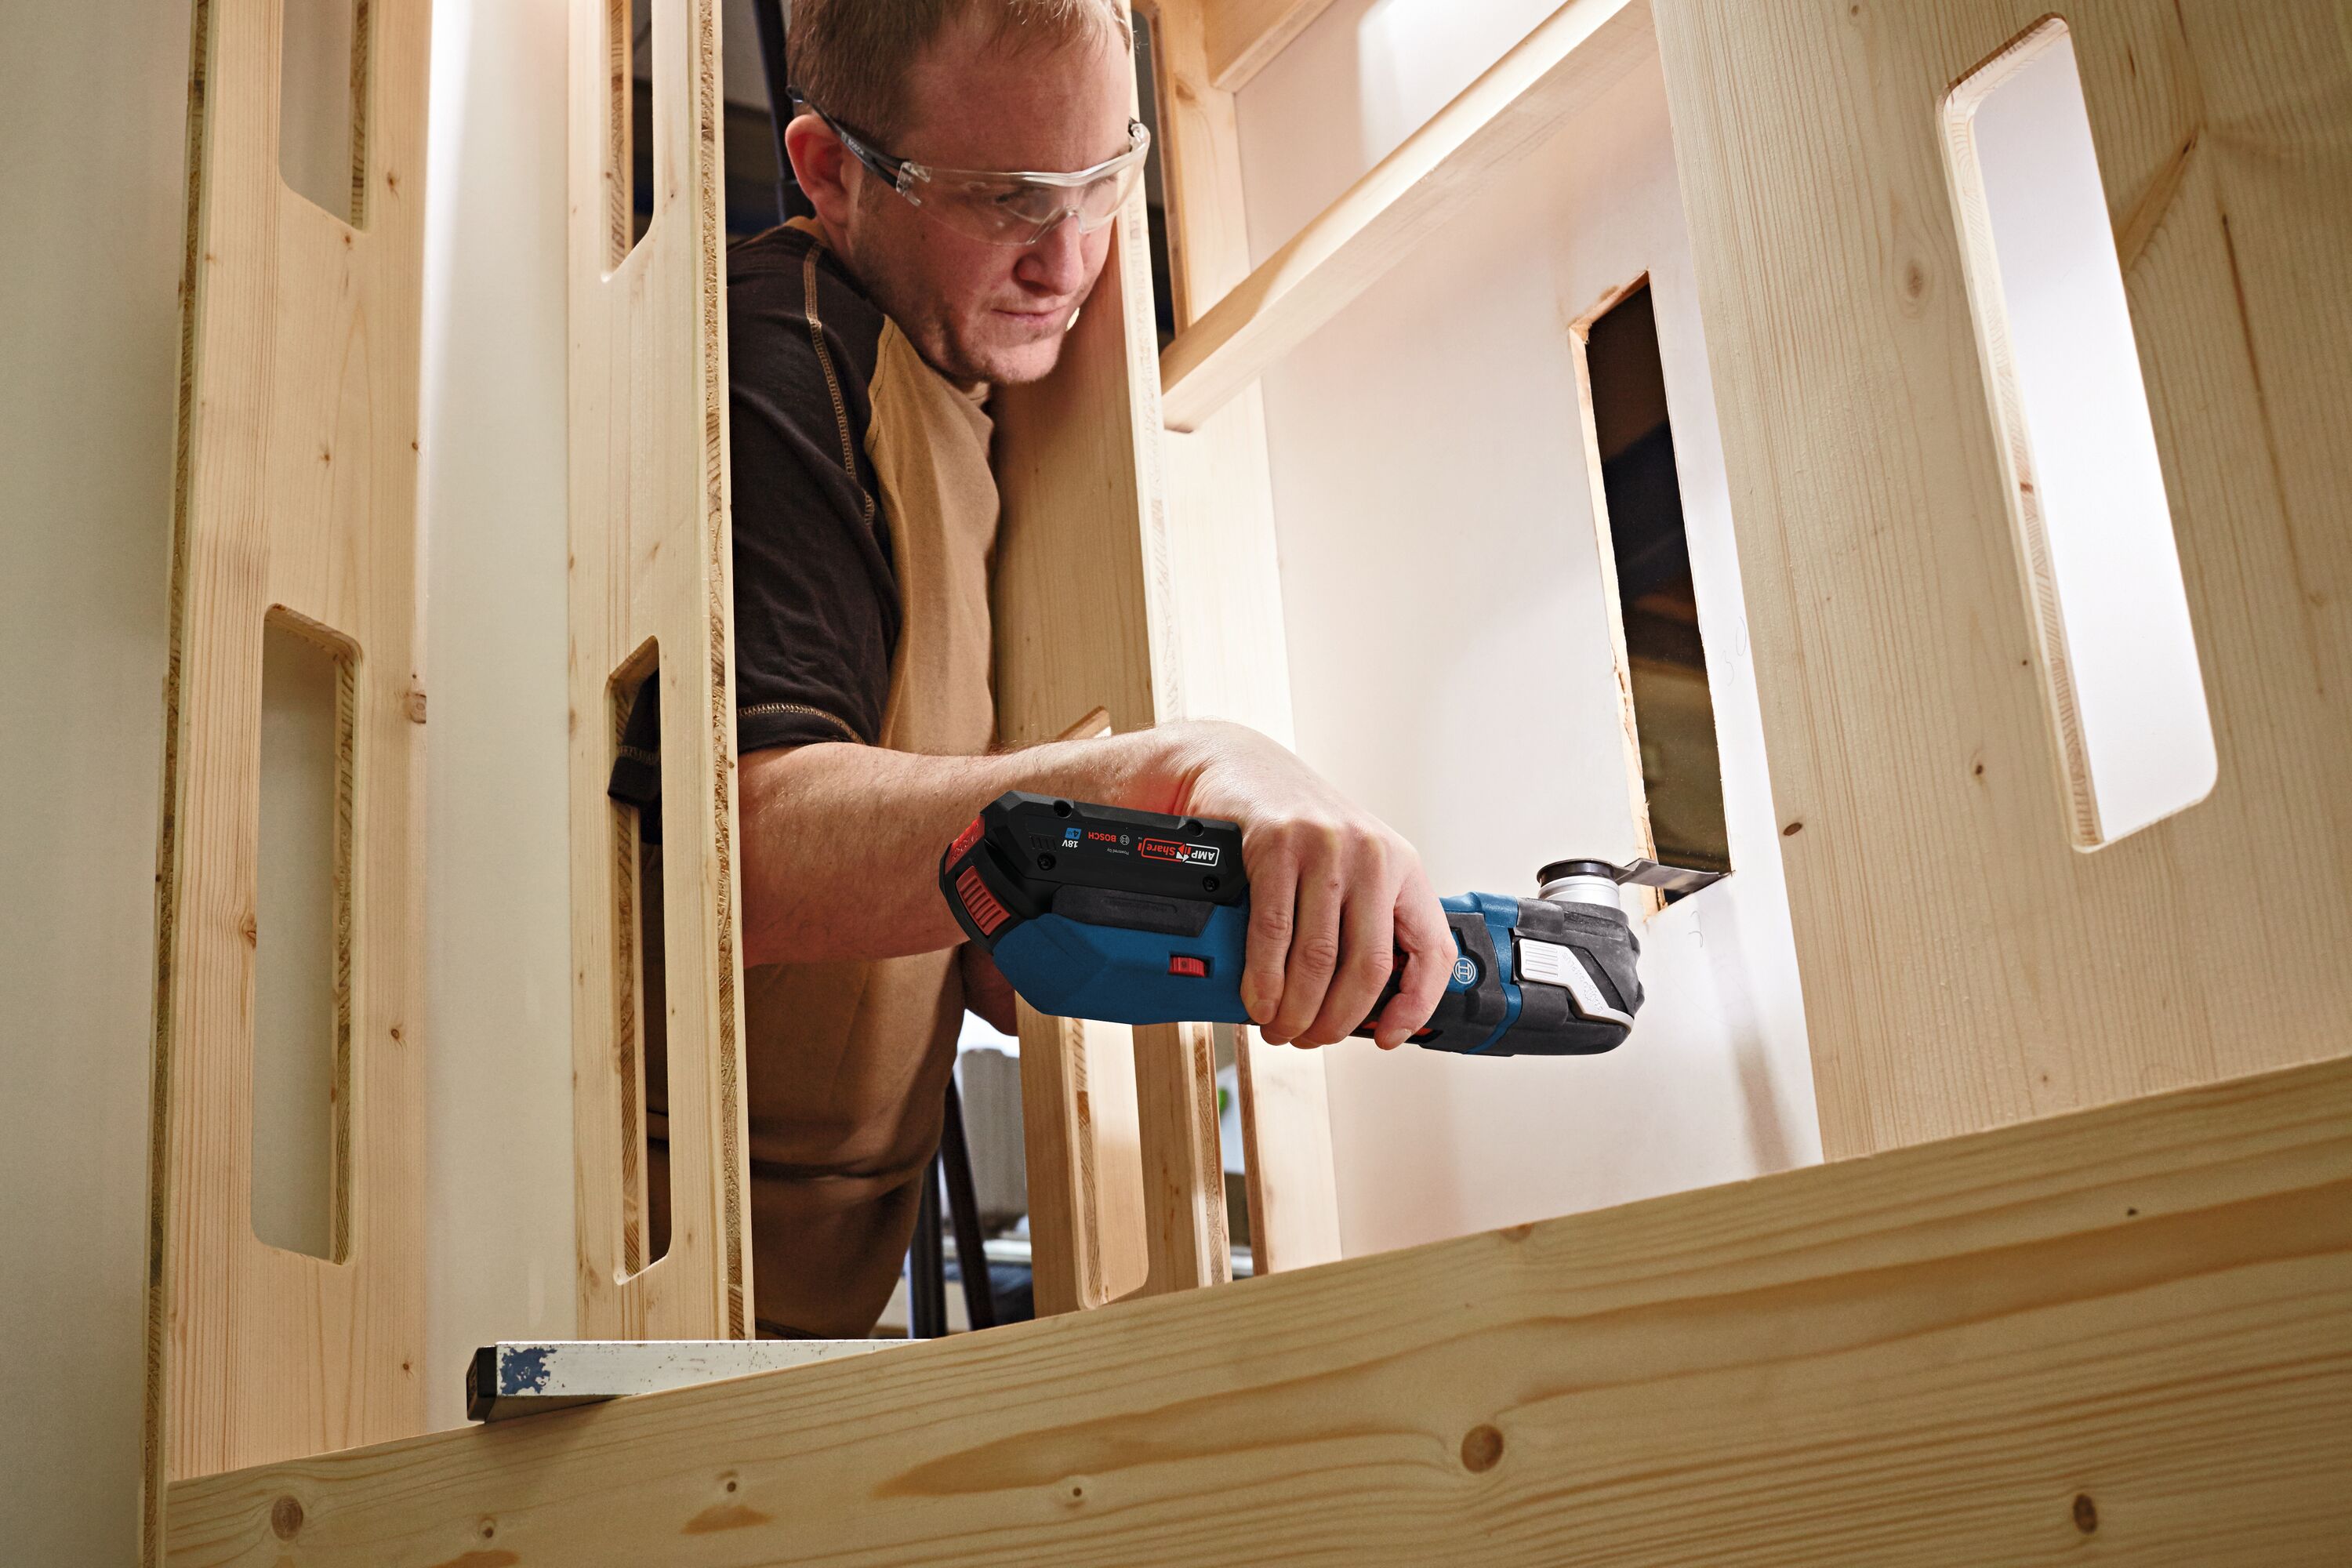 department Oscillating Multi-Tool at Cordless Variable StarlockPlus in Bosch 18-volt Brushless the Tool Kits Oscillating Speed